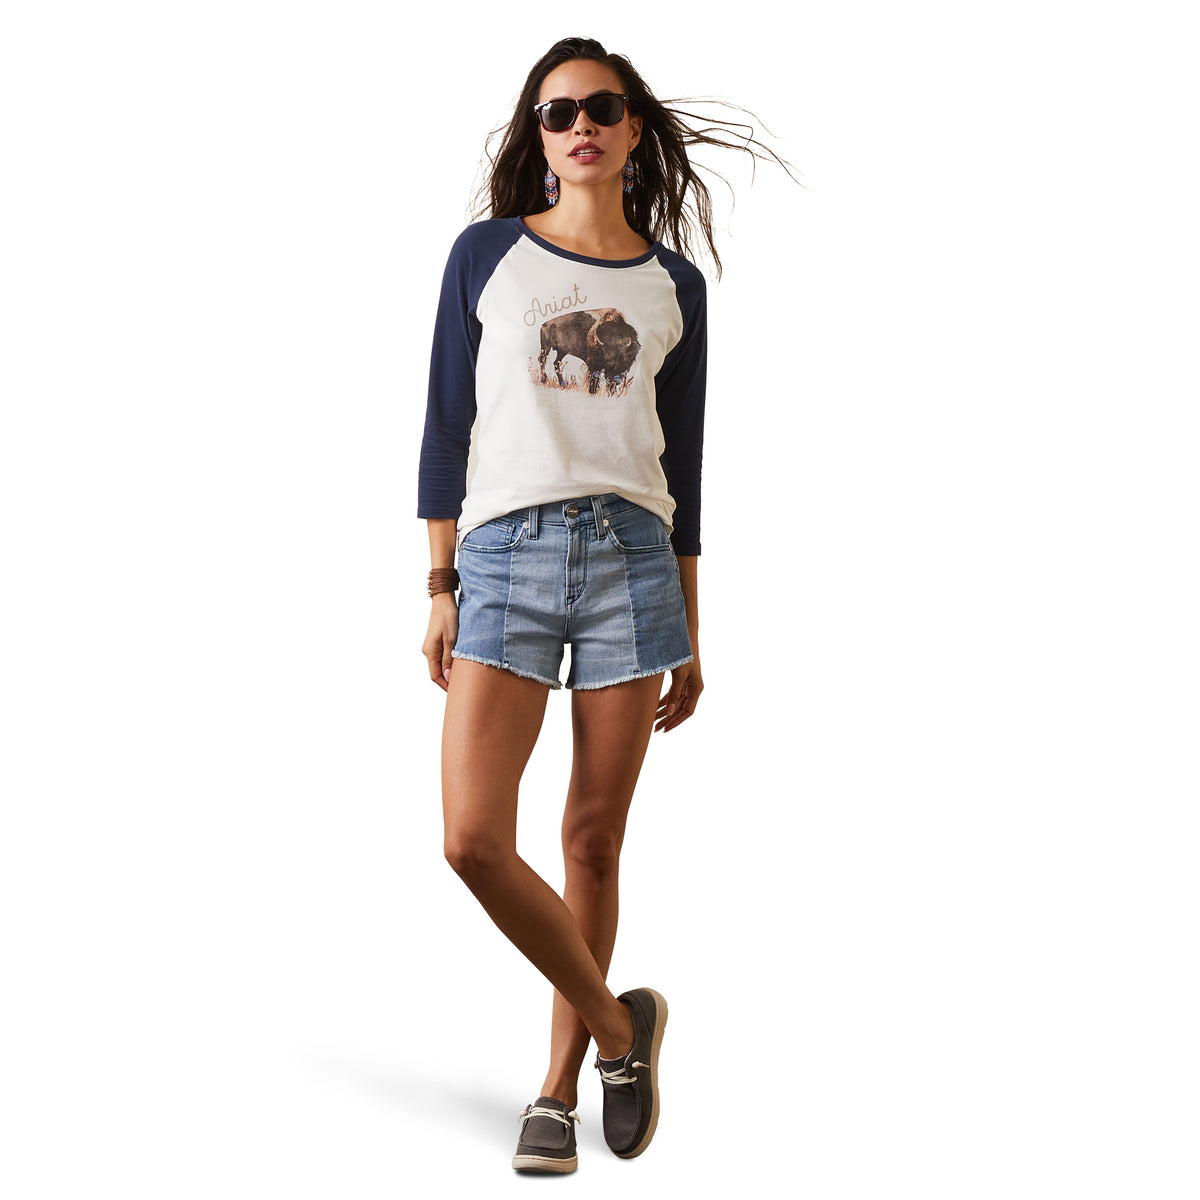 Ariat Womens Real Painted Dreams T Shirt - Coconut Milk/Navy